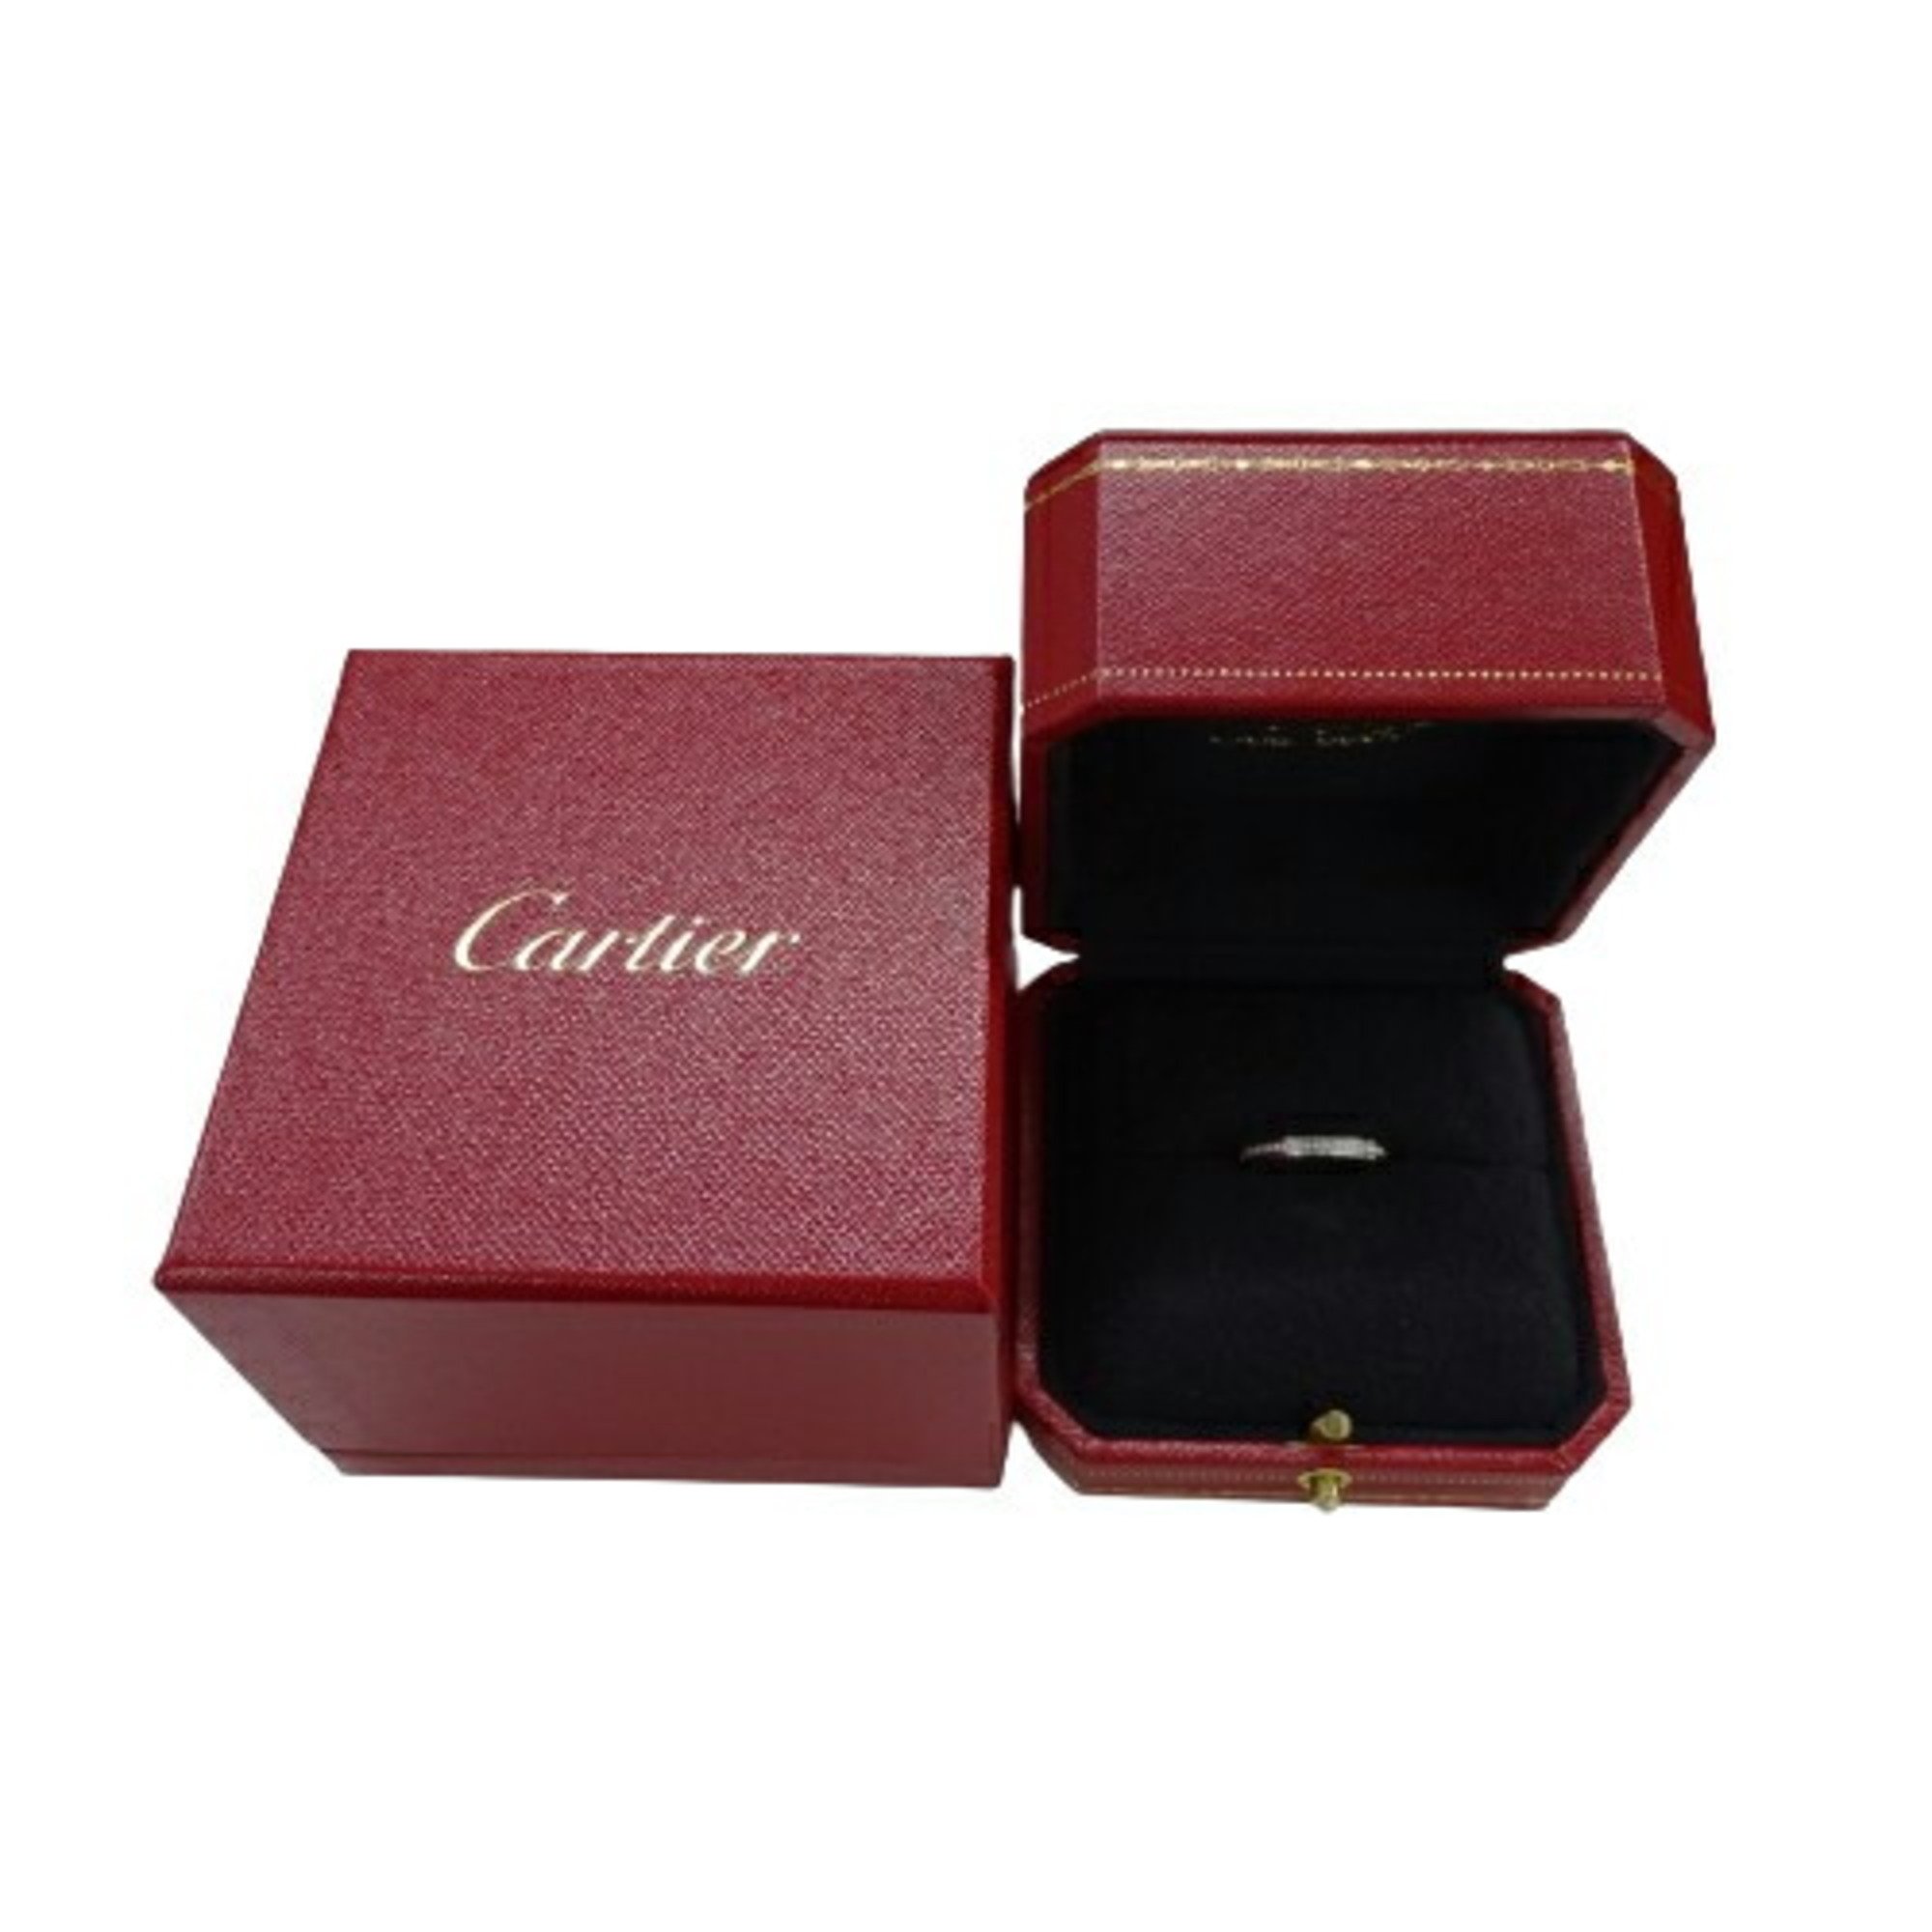 Cartier Ring for Women, PT950 Diamond Amour Wedding Platinum #48, Size 8, Polished